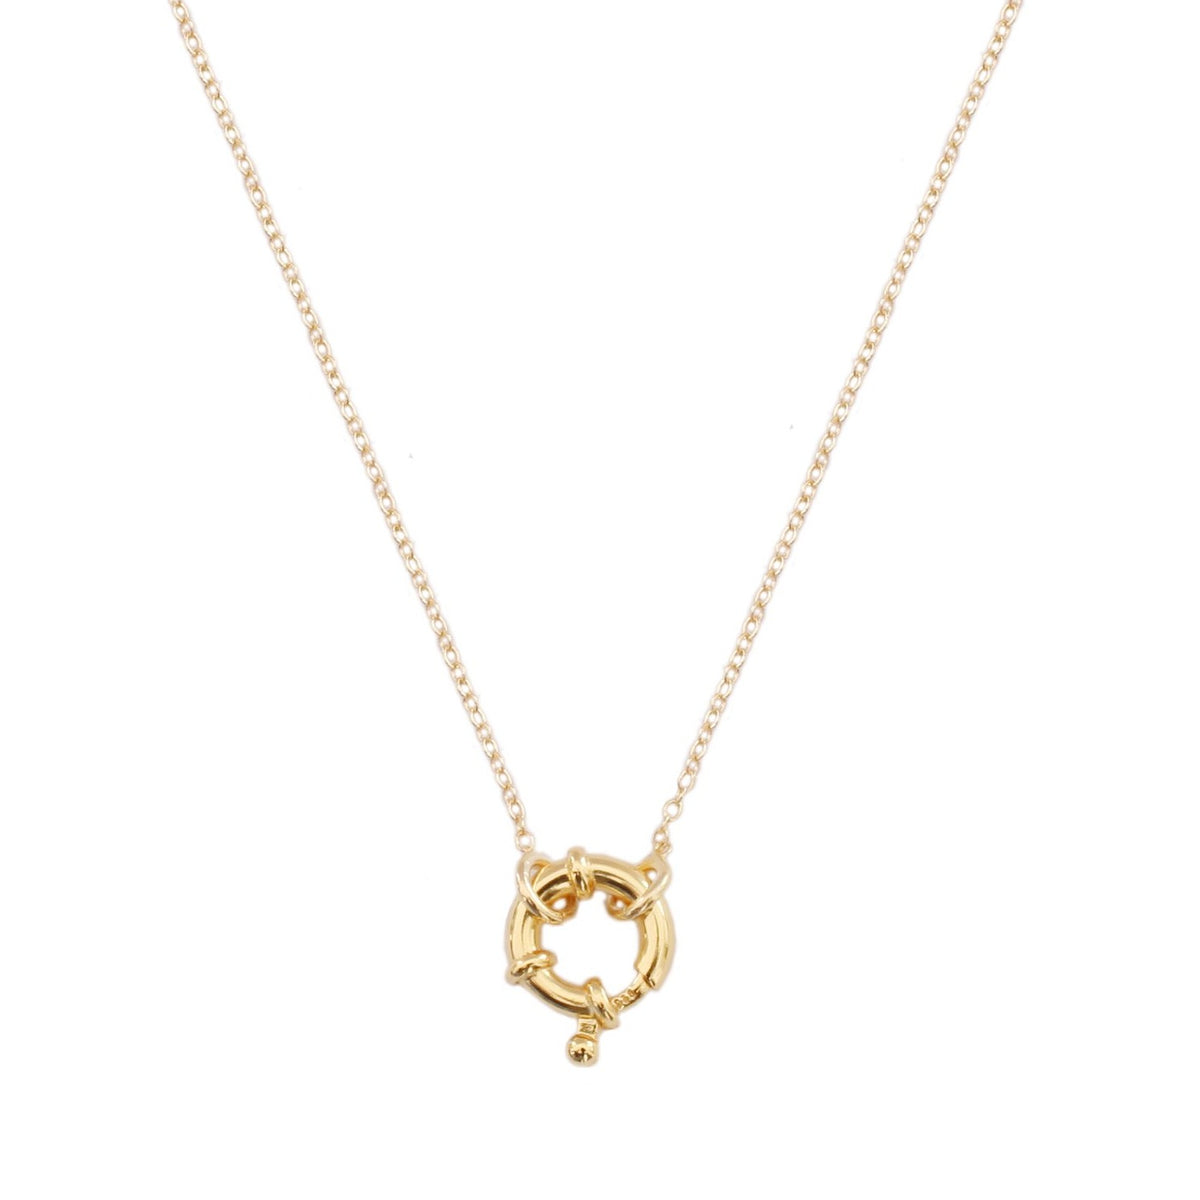 Openclose chain gold - ByMirelae